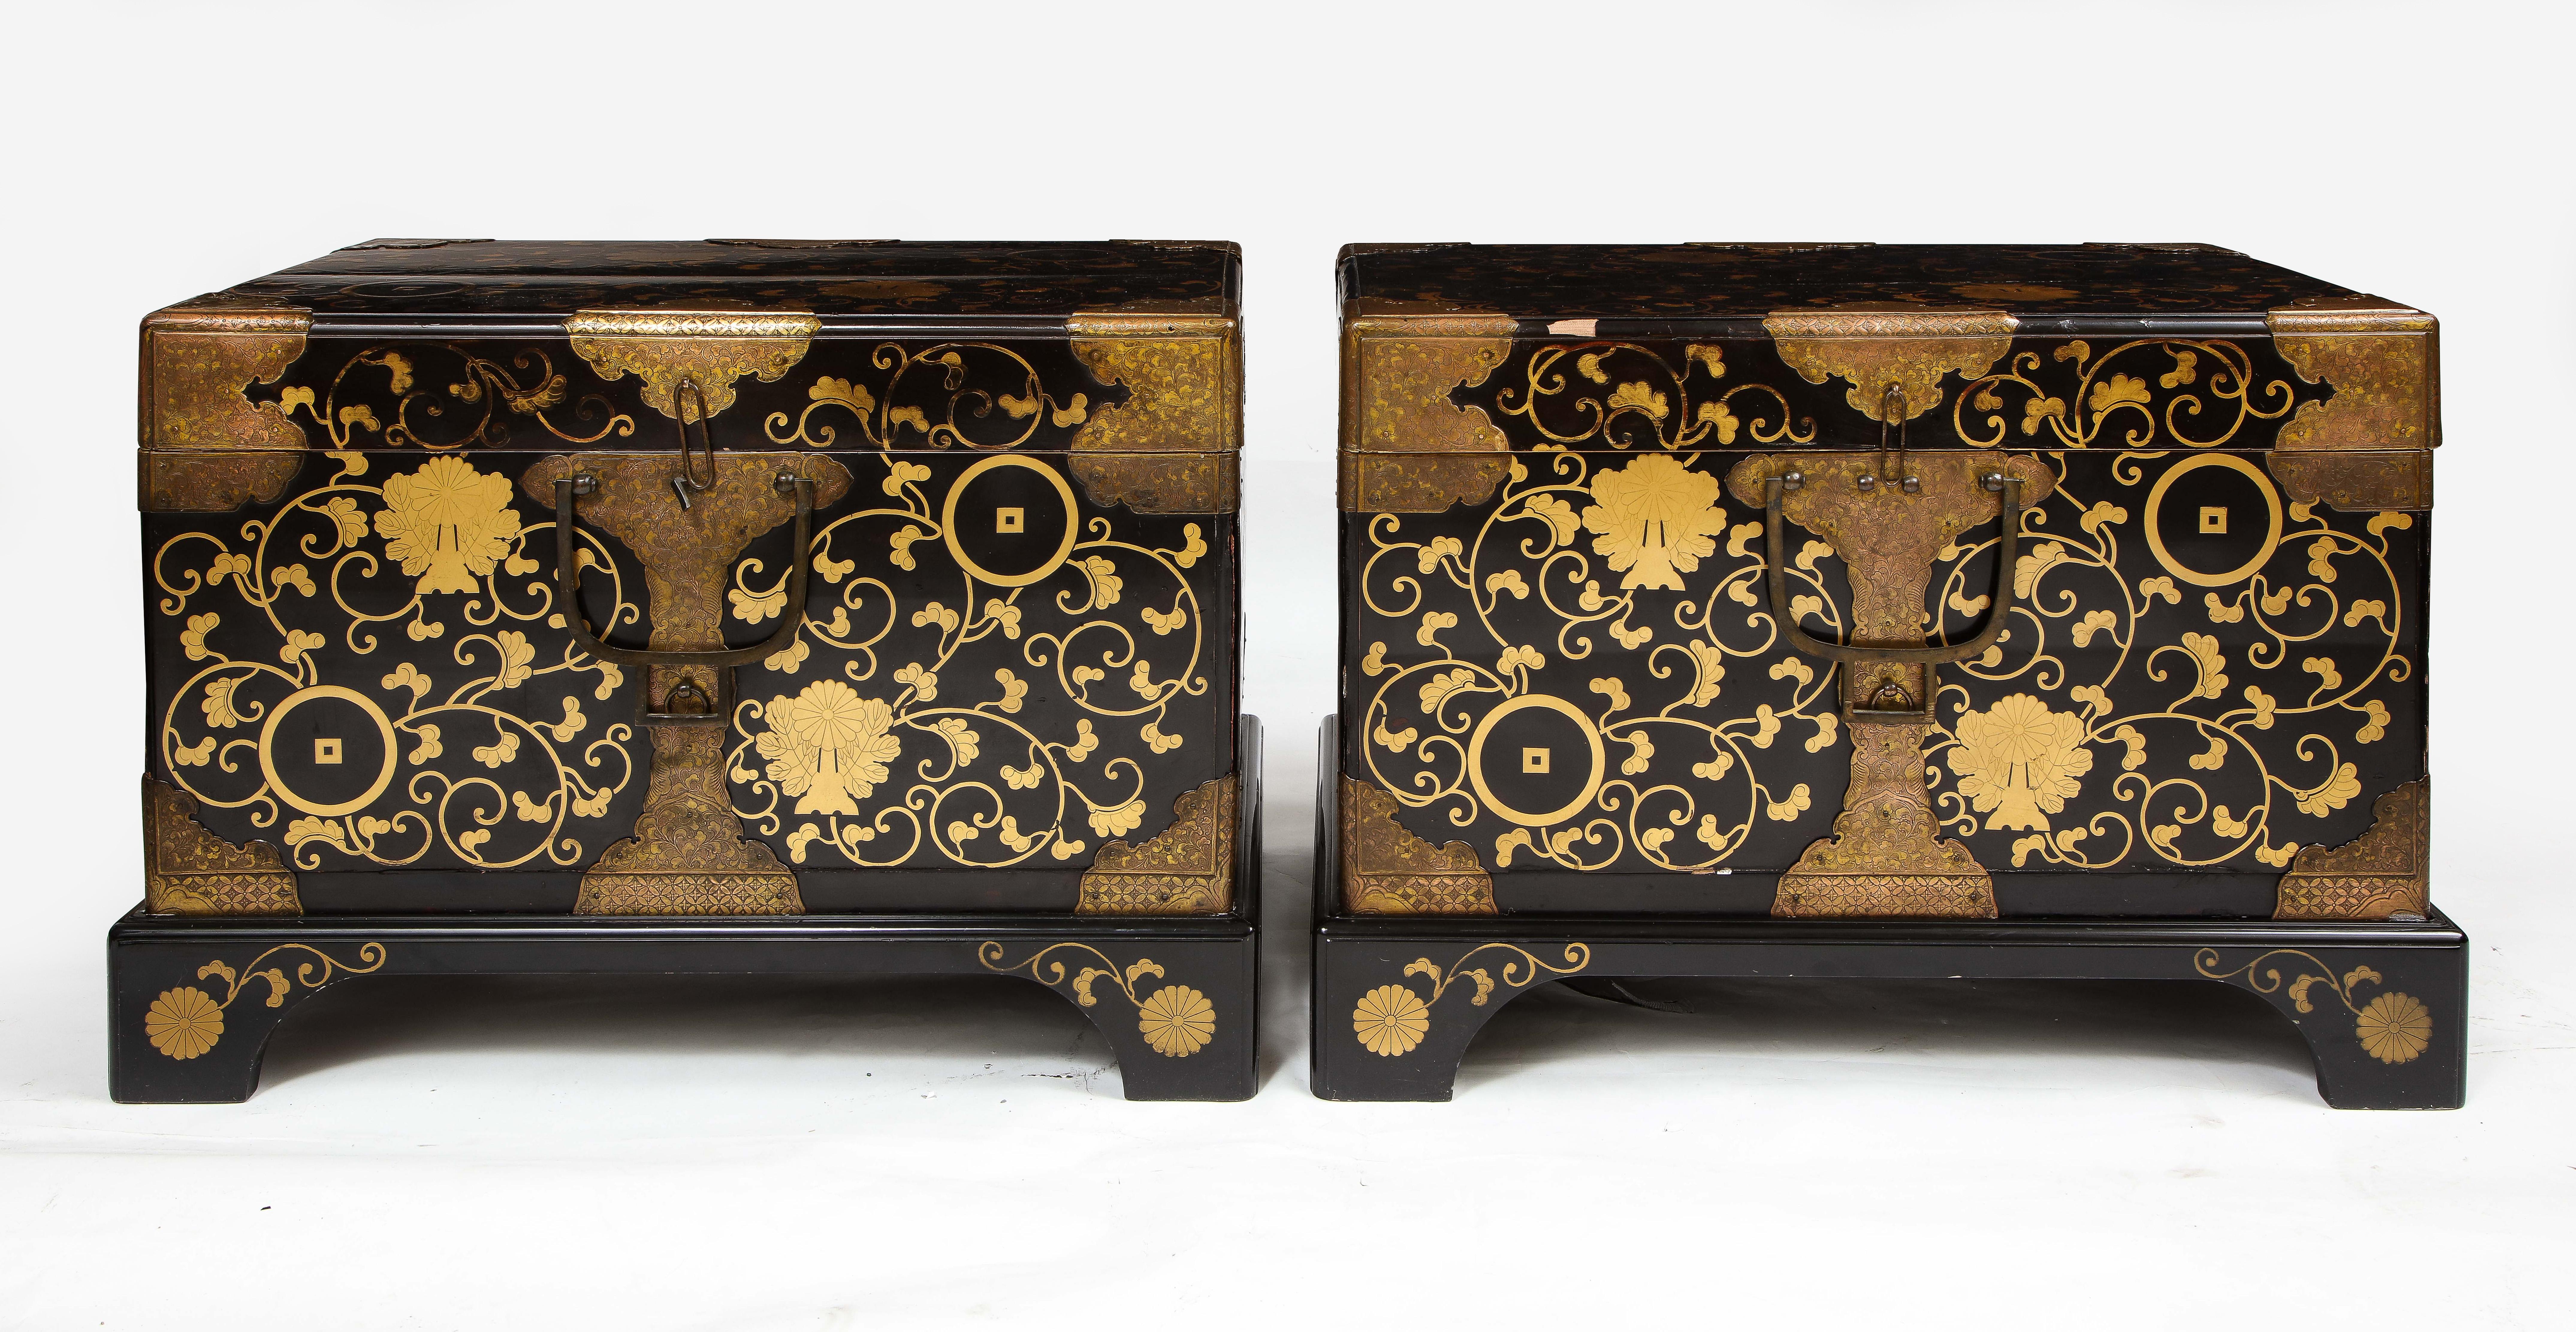 A Fine Pair of 19th Century Japanese Meiji Period Dore Bronze Mounted Lacquered Chests/Trunks.  Each chest is beautiful with a fine black lacquer which is heavily detailed and hand-painted with 24K gilt decoration of flowers and vines.  Both chests